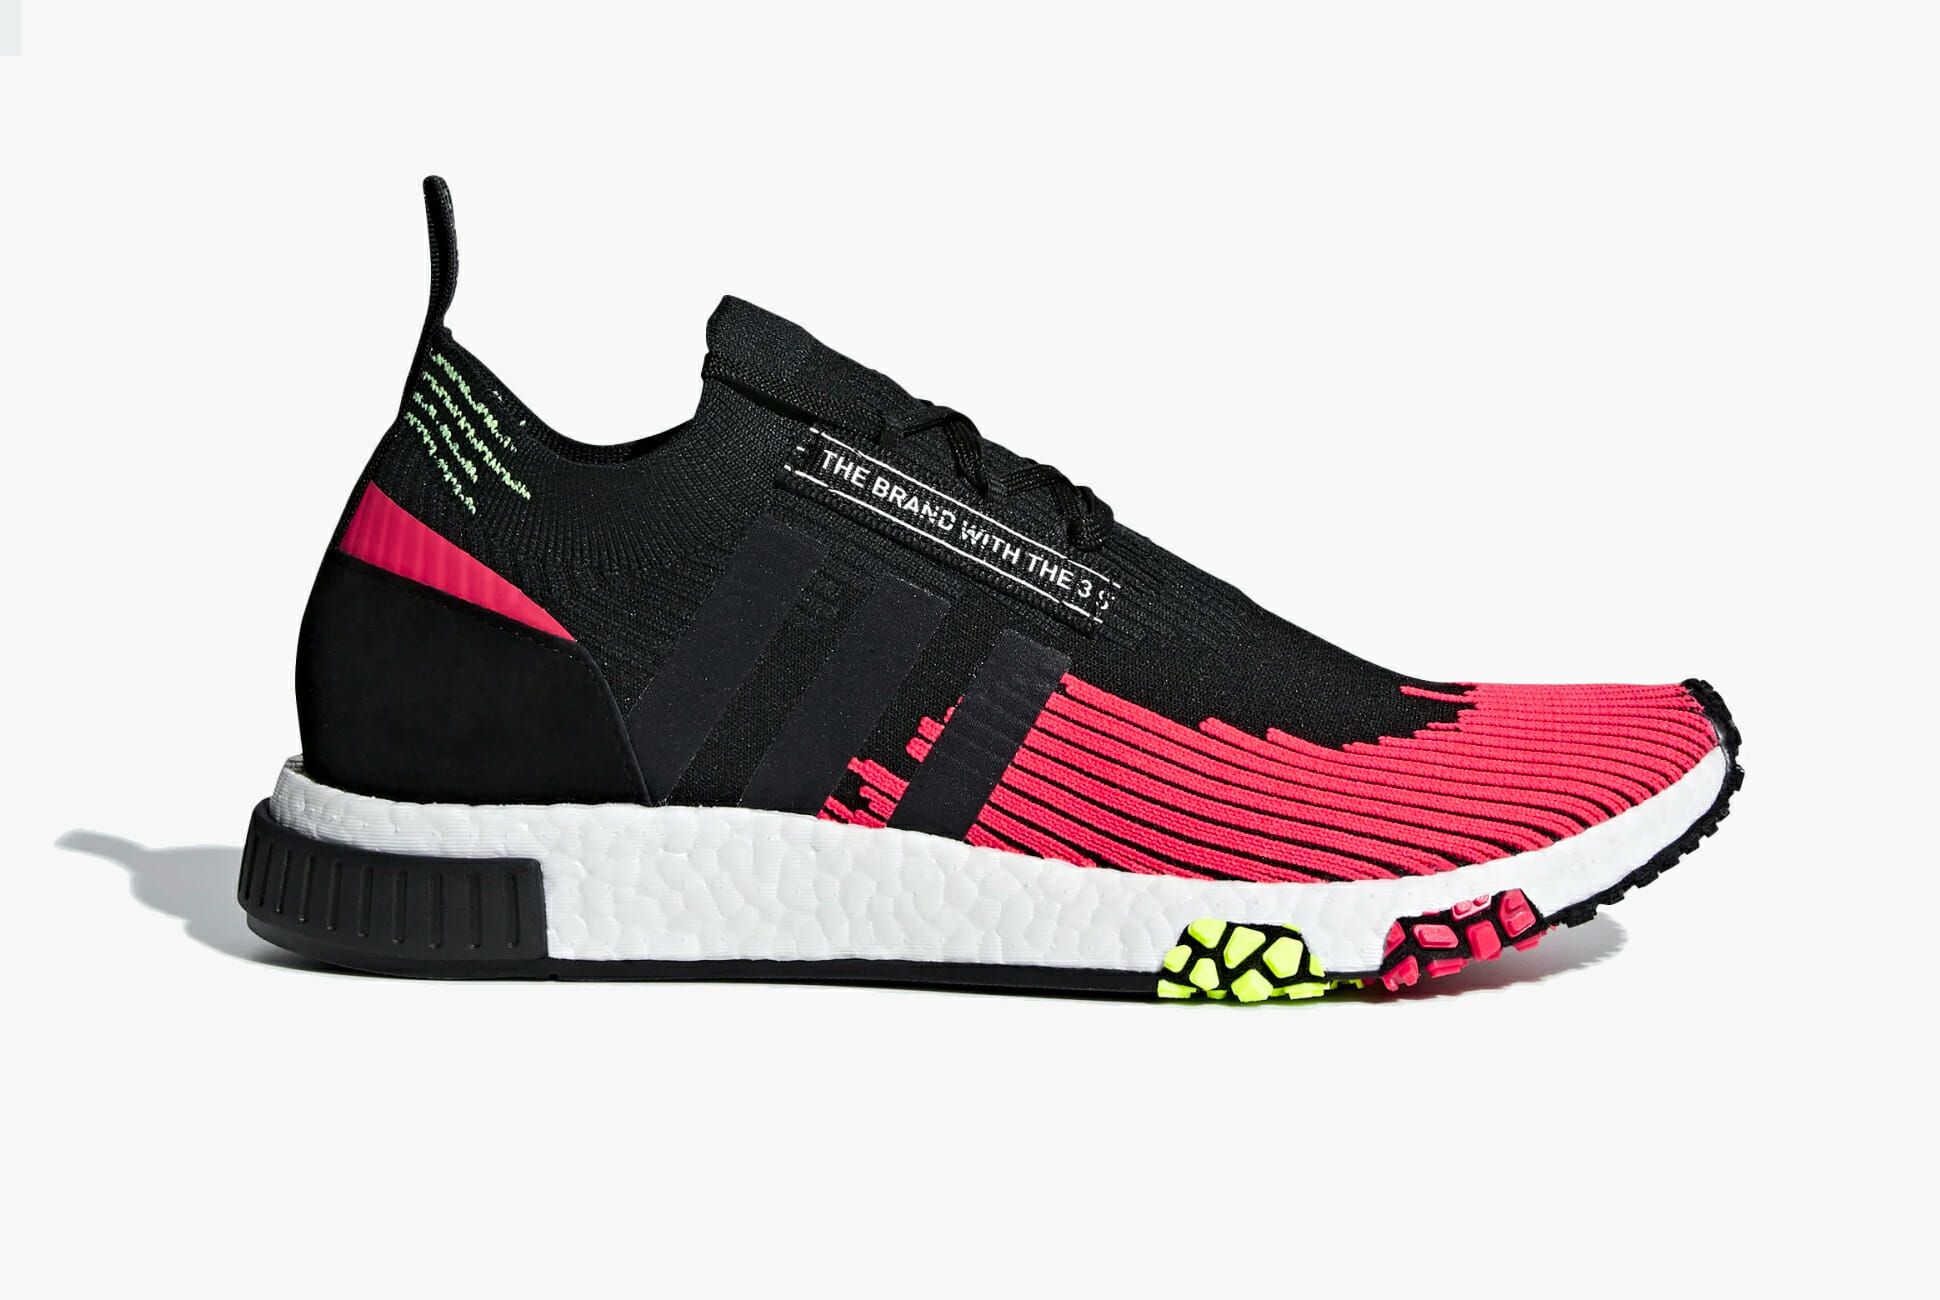 adidas nmd_racer primeknit shoes